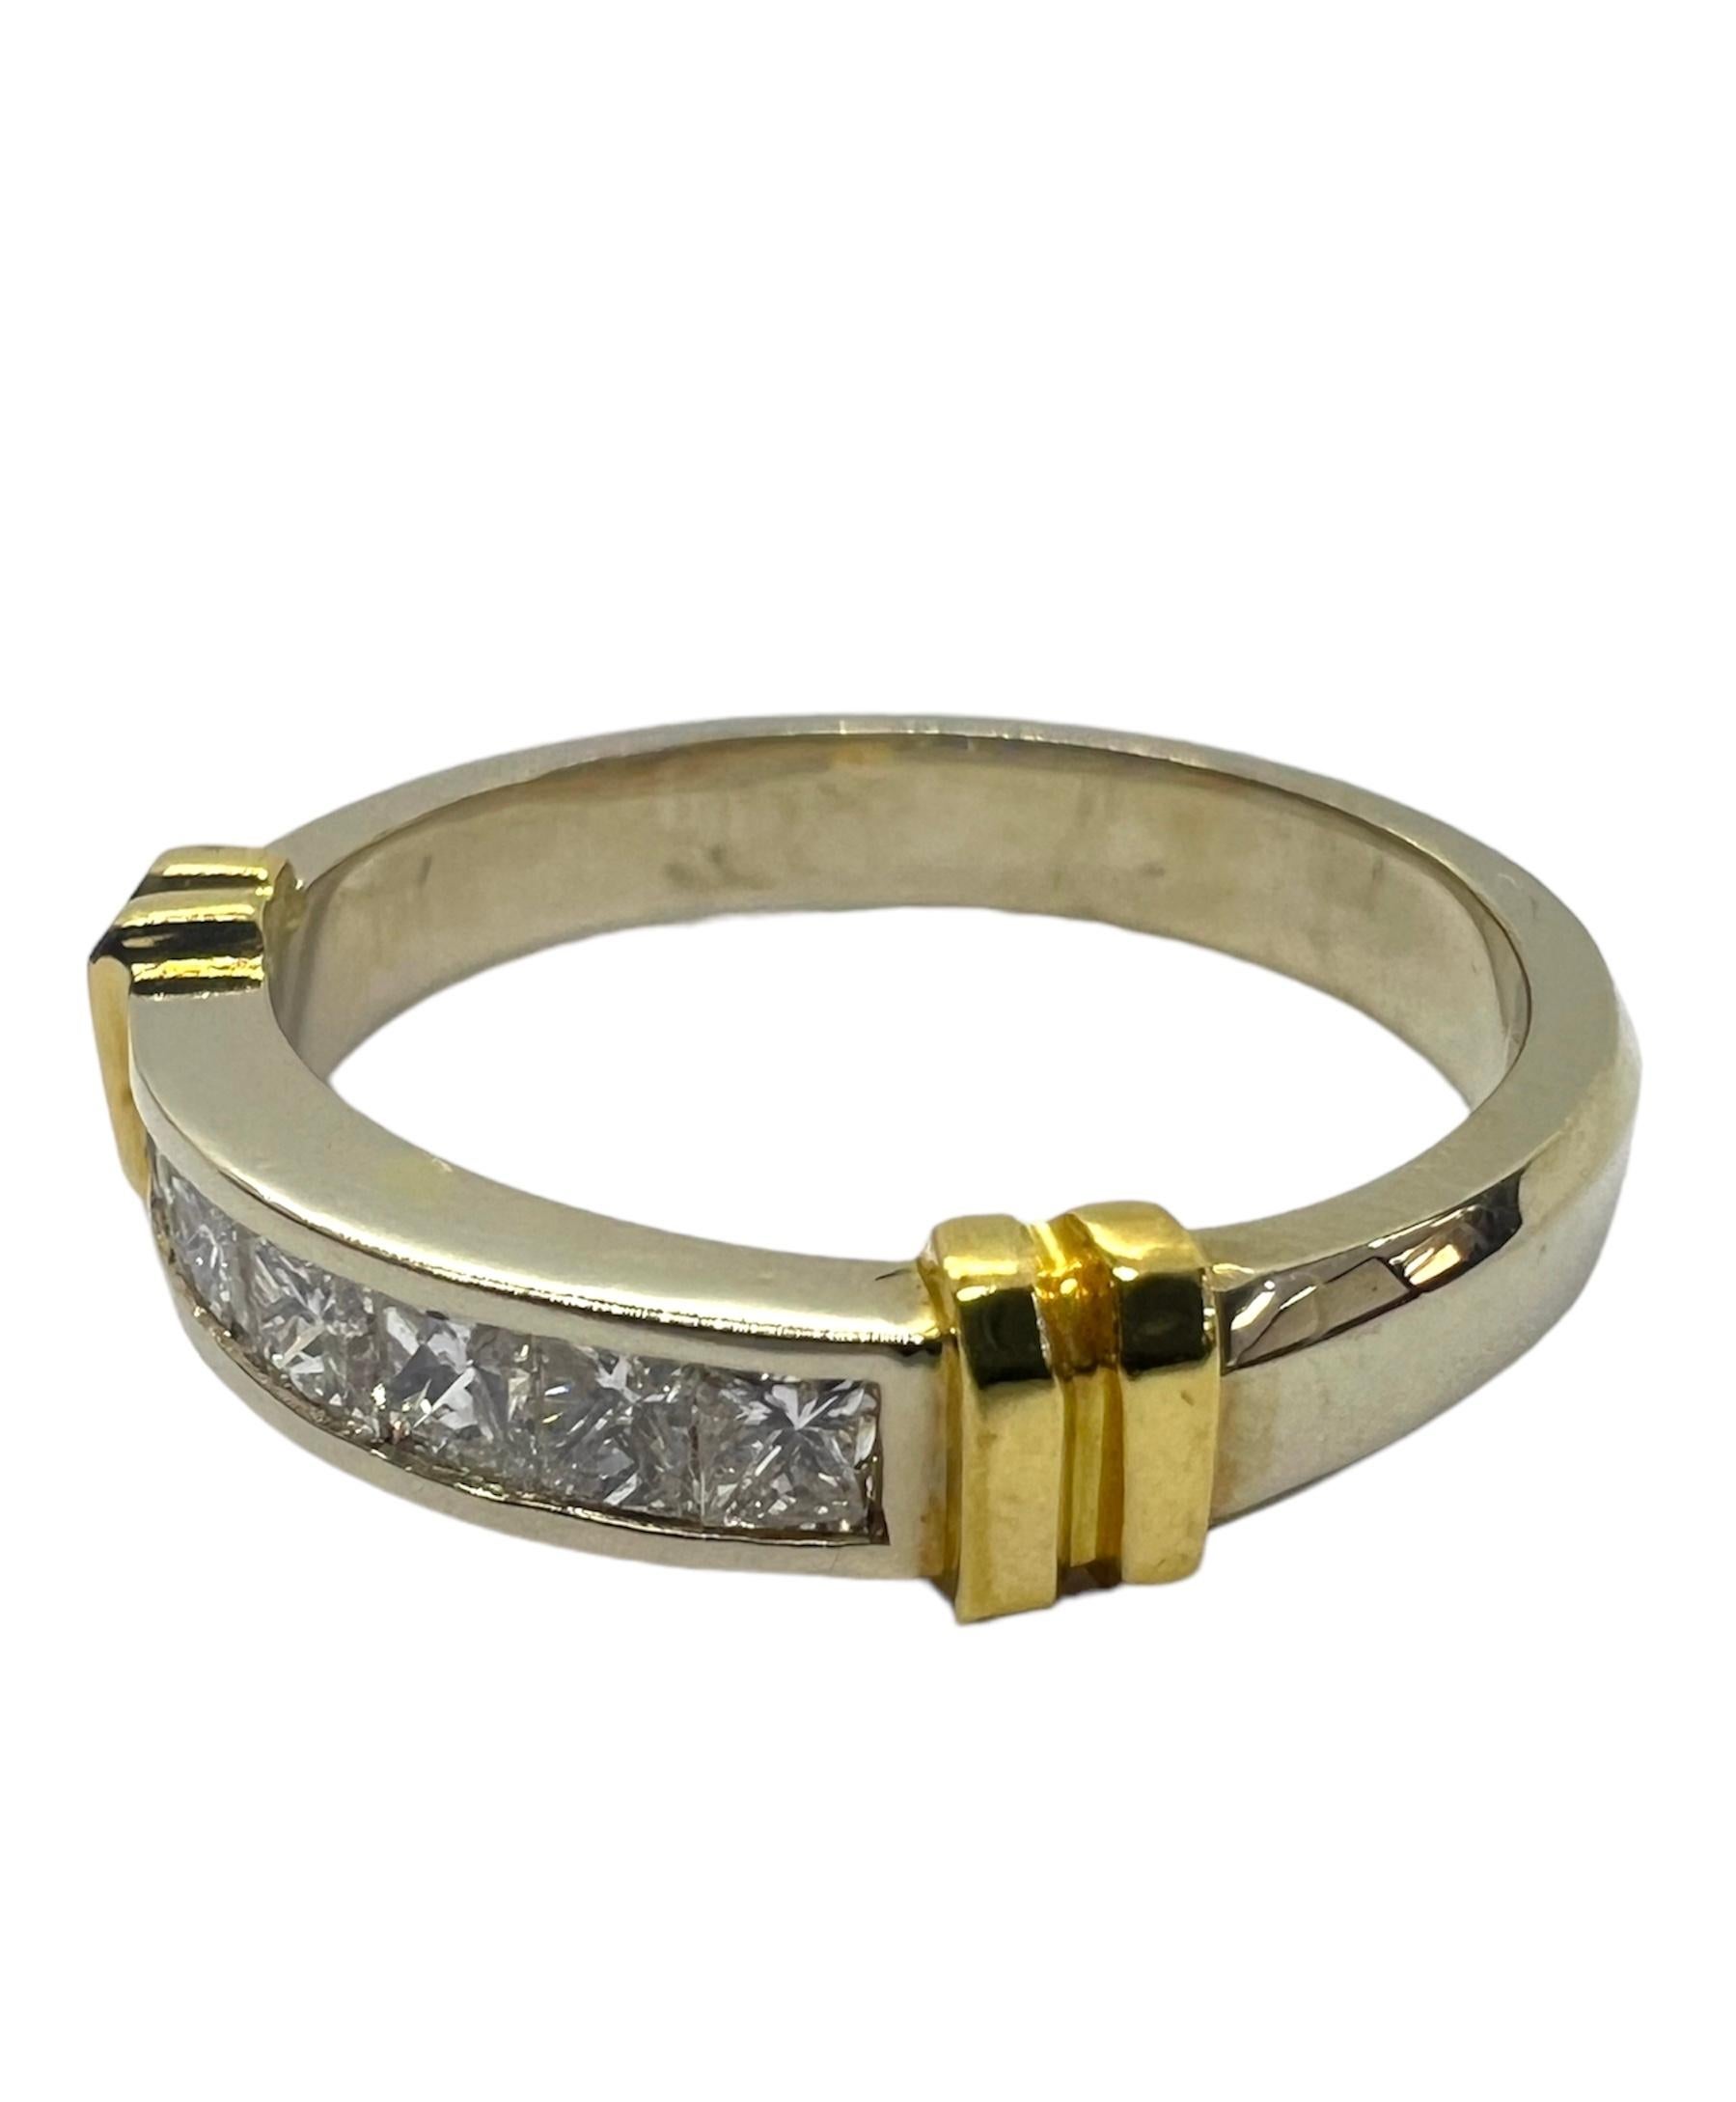 18K yellow gold band ring with square cut diamonds.

Sophia D by Joseph Dardashti LTD has been known worldwide for 35 years and are inspired by classic Art Deco design that merges with modern manufacturing techniques.   